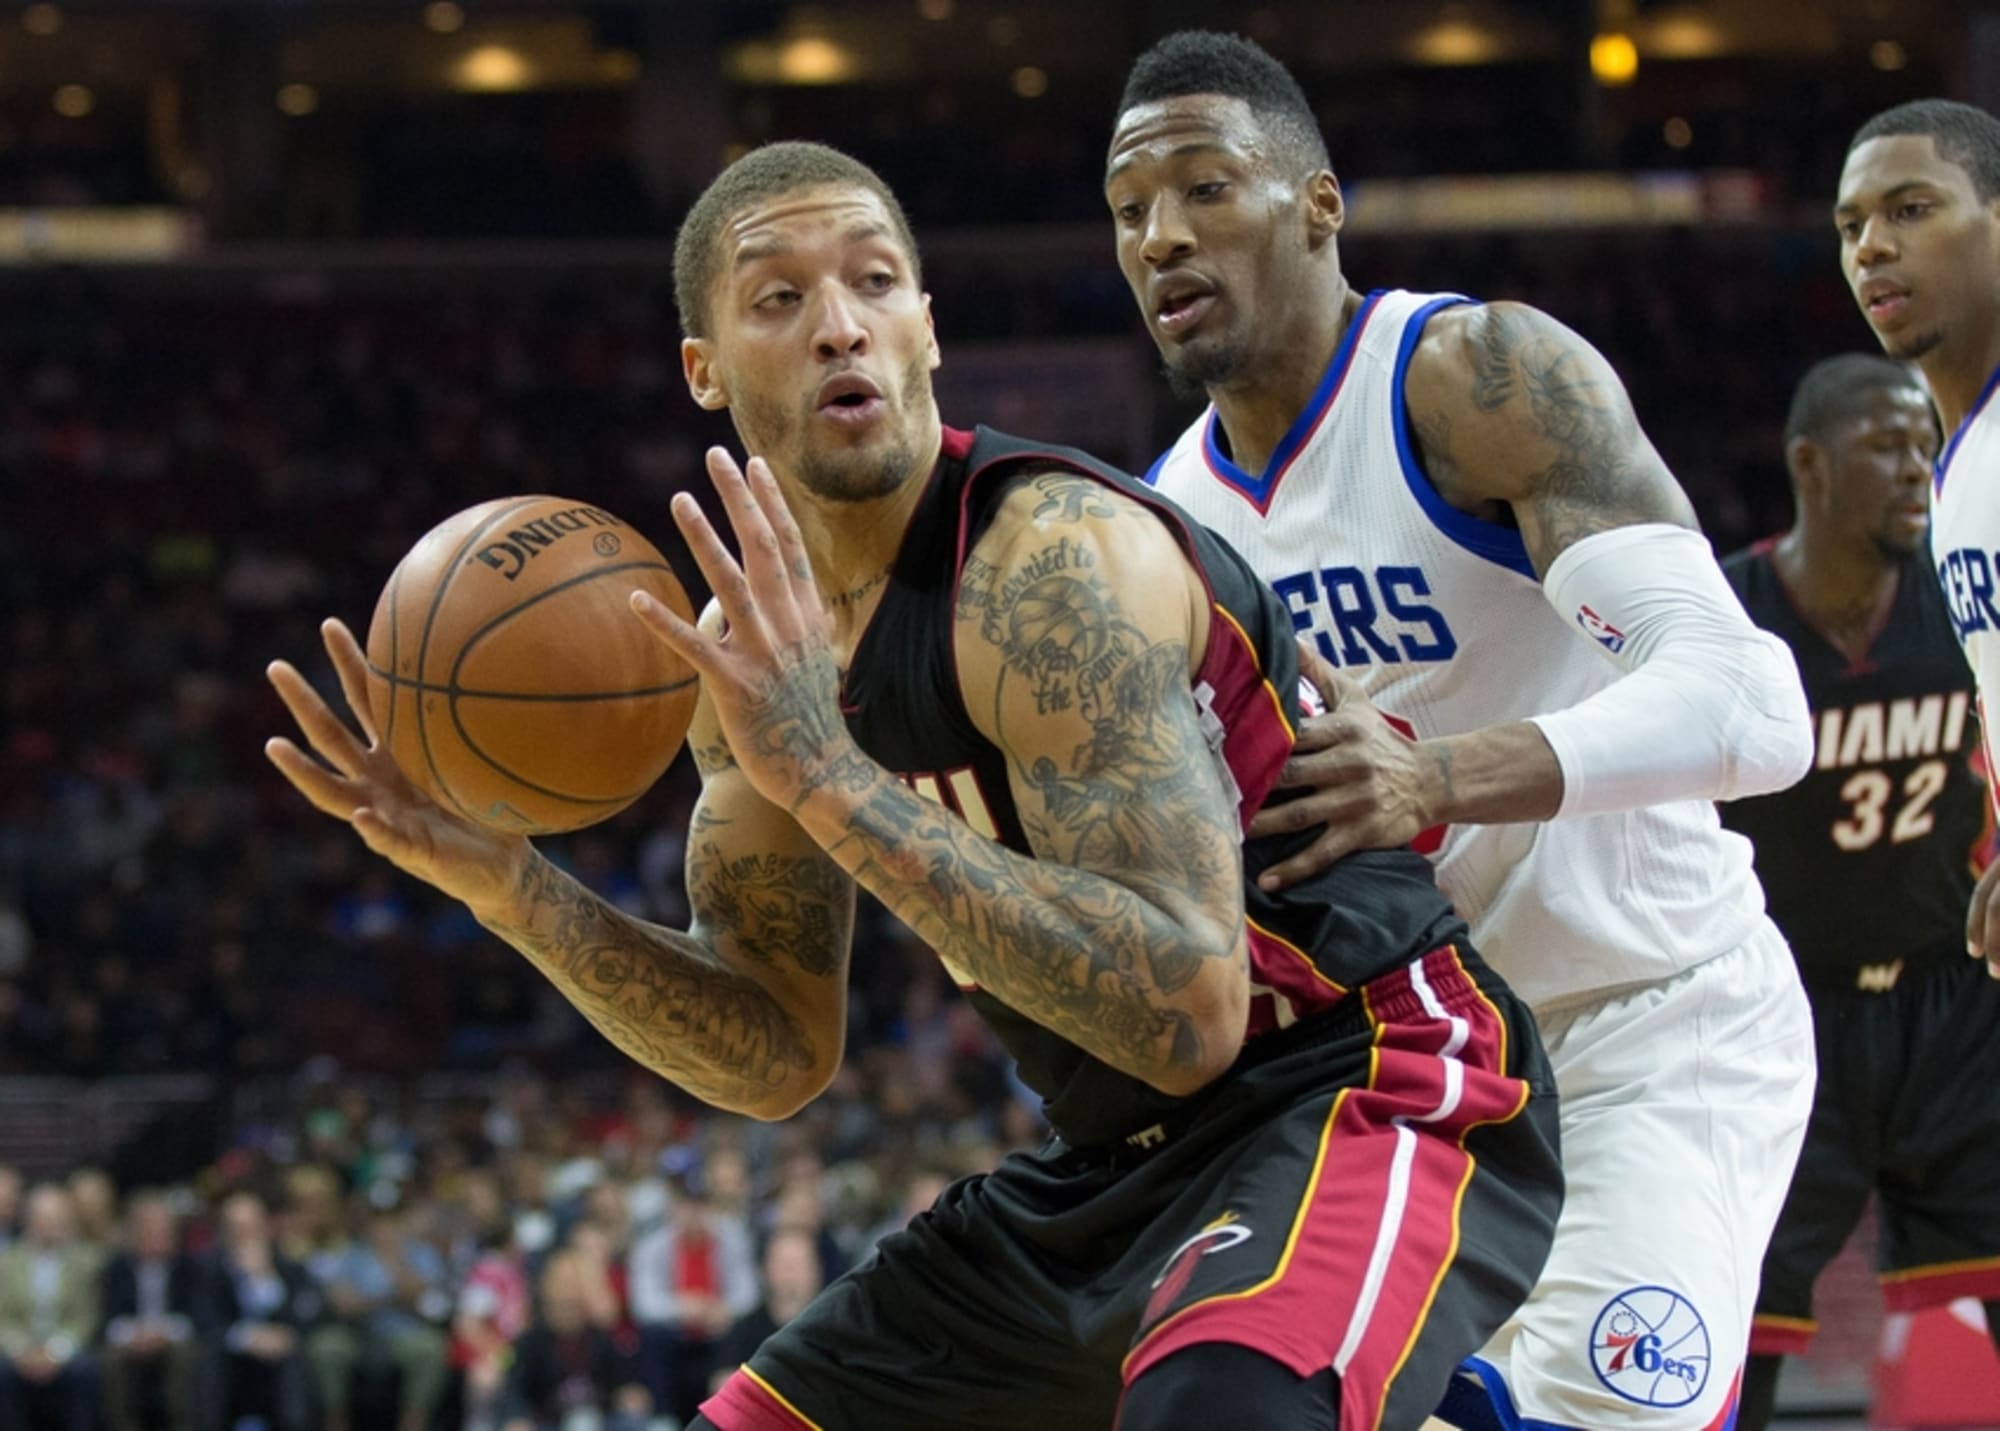 Rockets sign Michael Beasley as their basketball tragedy devolves into  comedy - The Dream Shake